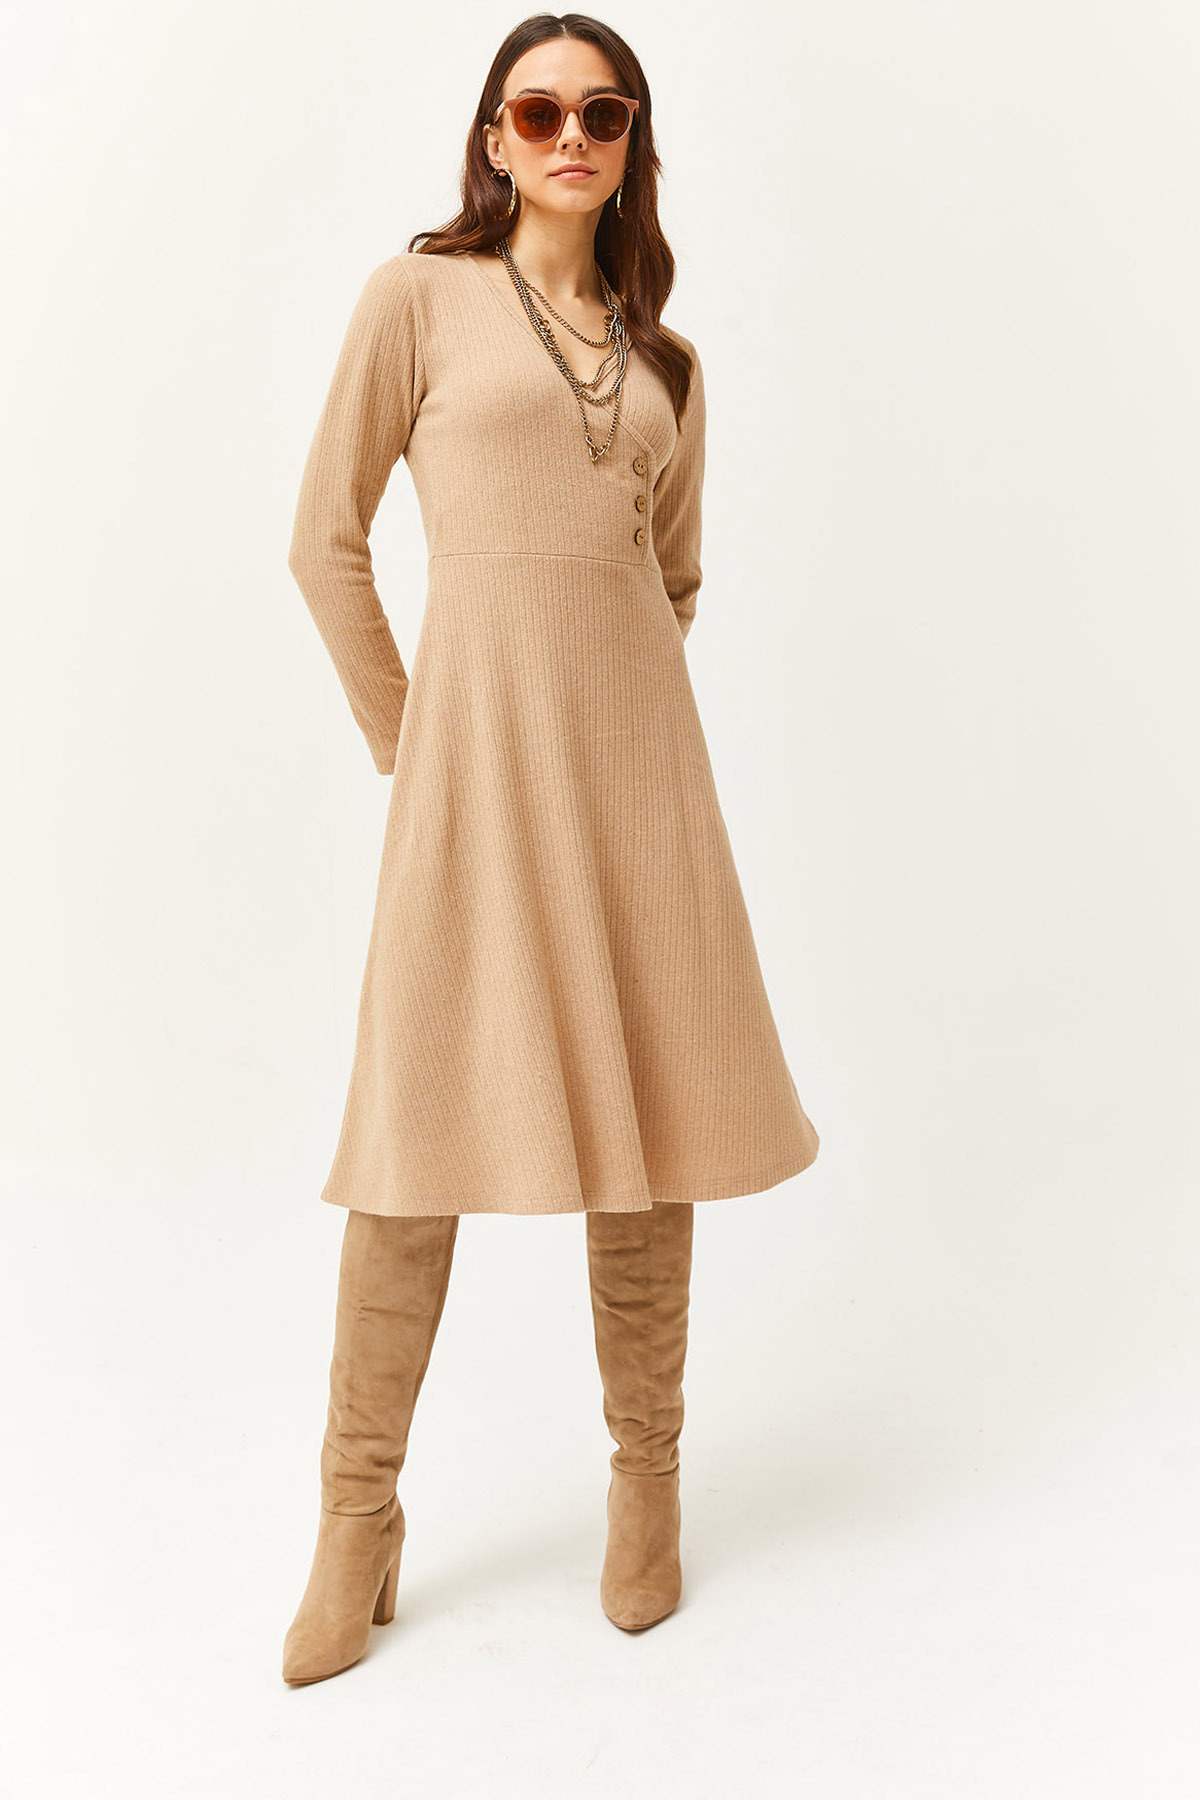 Levně Olalook Women's Camel Button Detailed Double Breasted Midi Bell Dress